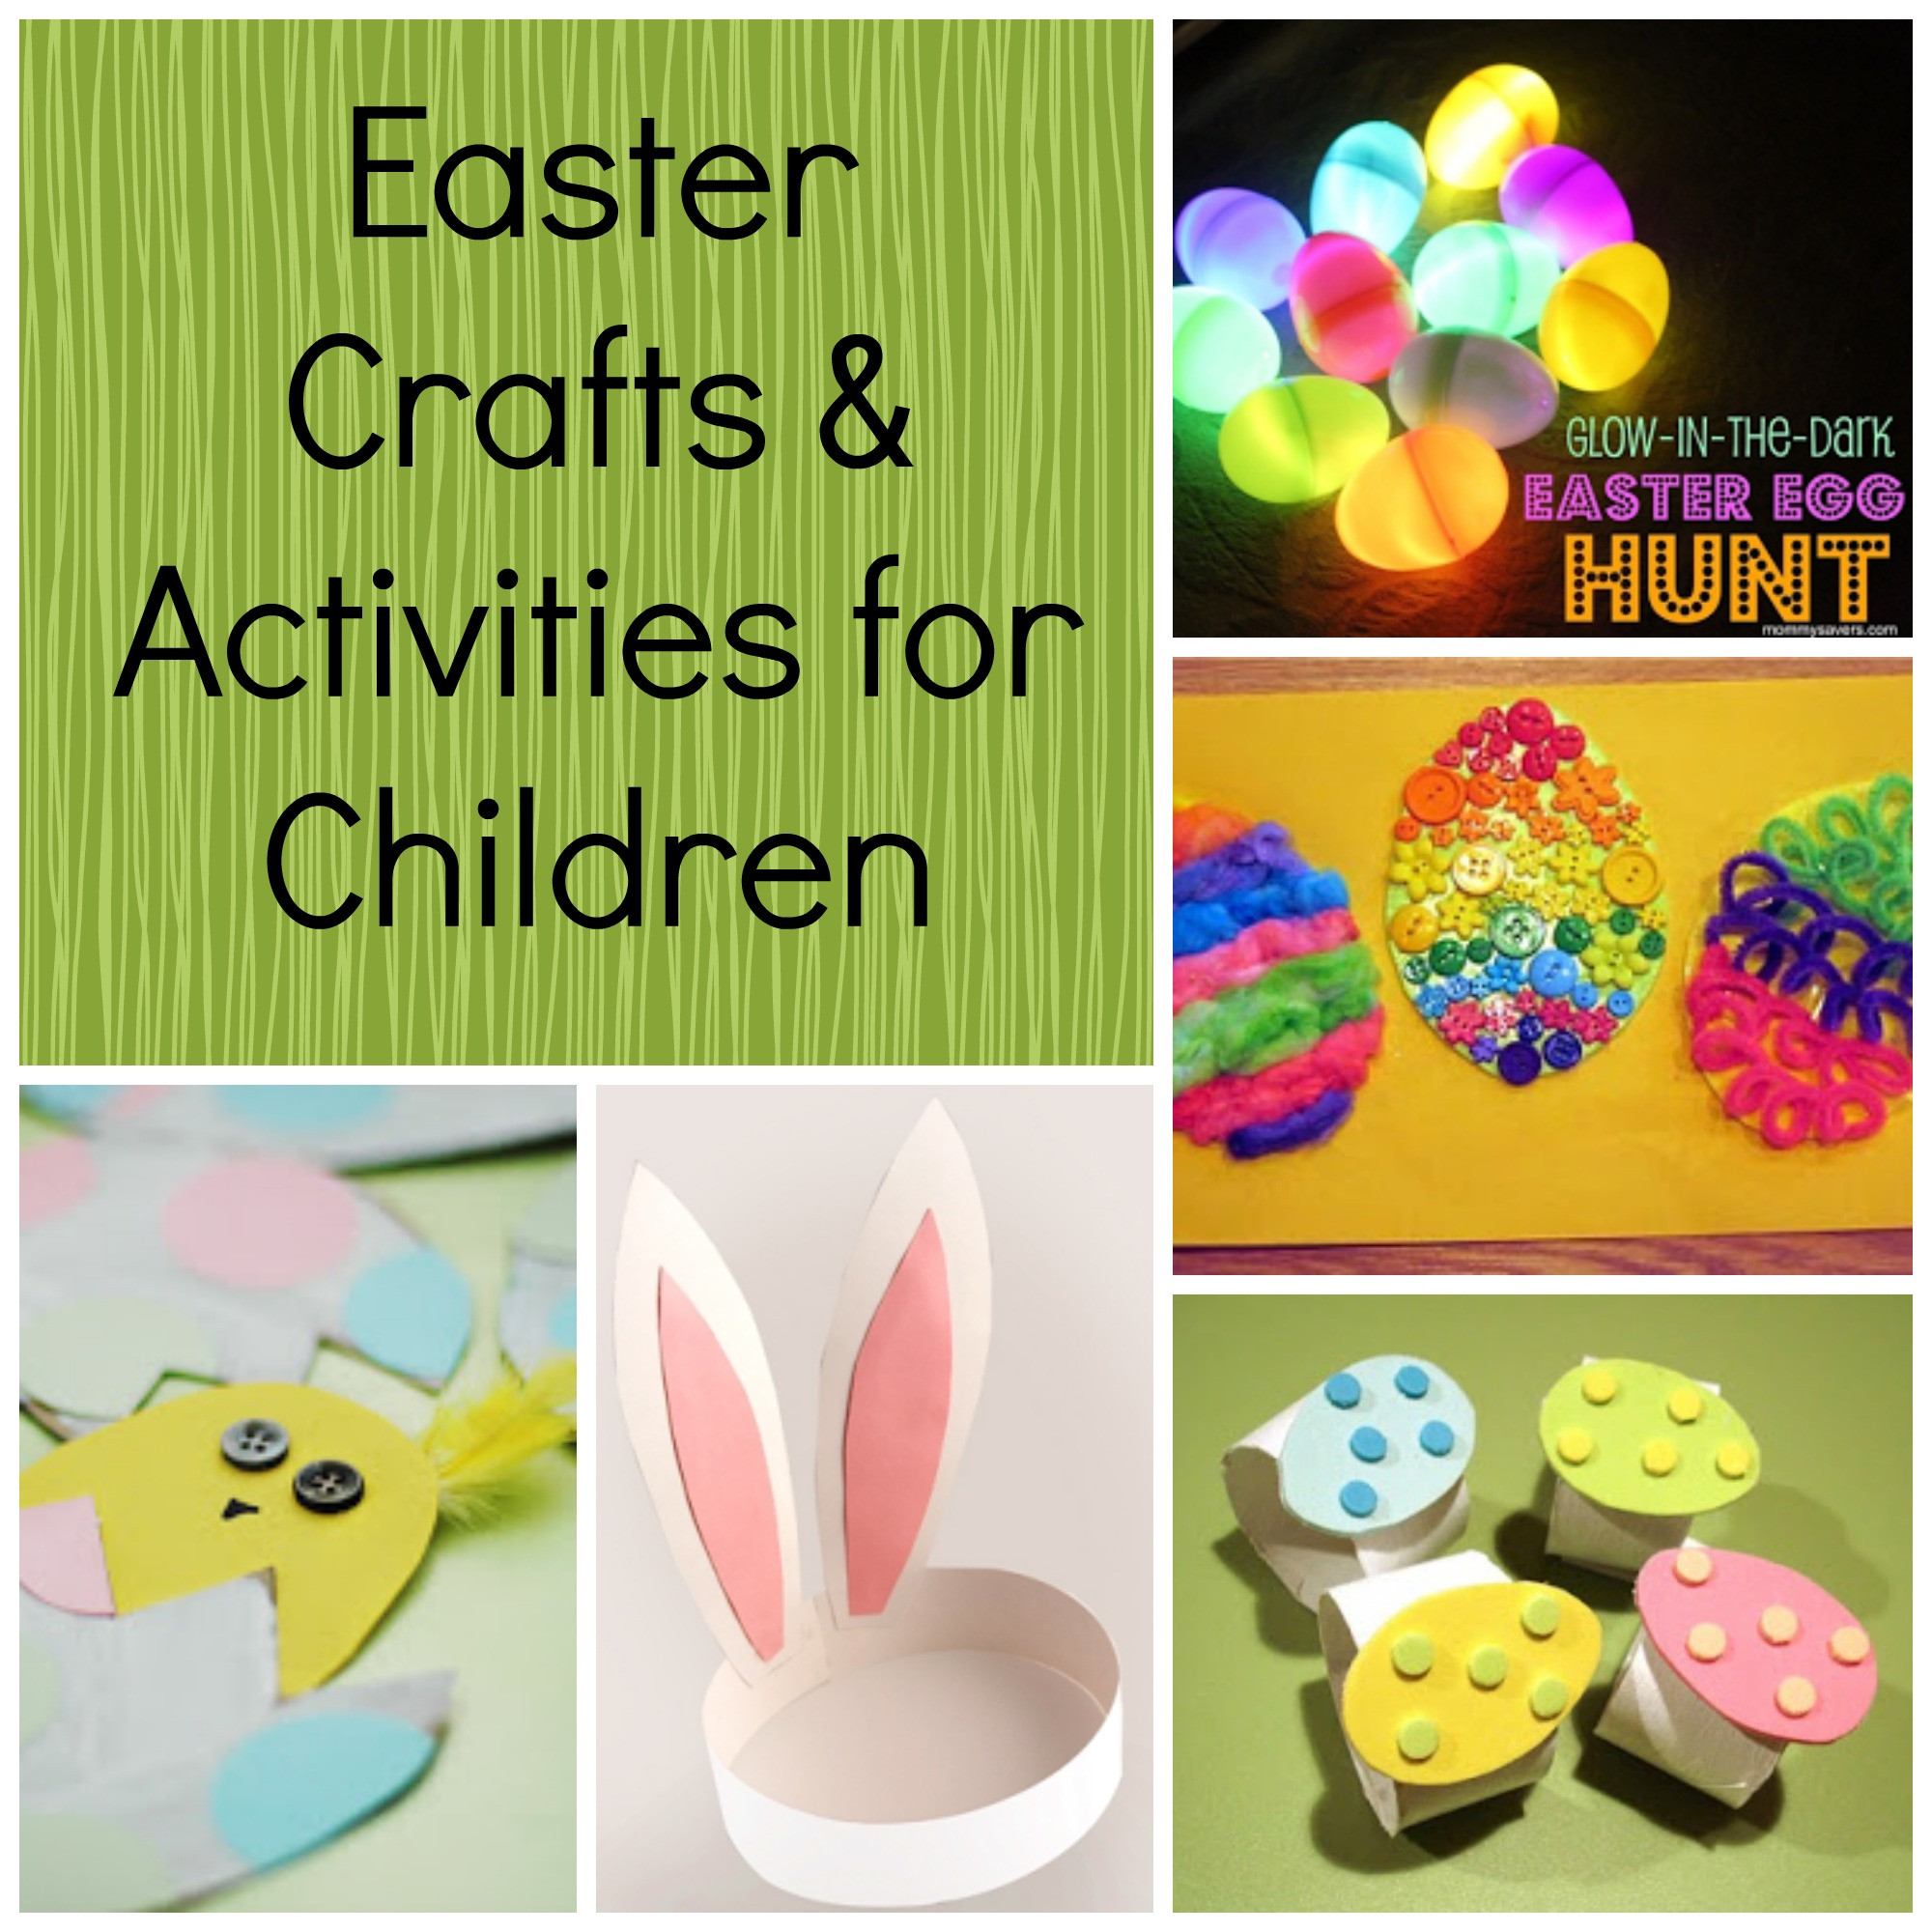 Childrens Easter Crafts
 Easter Crafts & Activities for Children Saving Cent by Cent